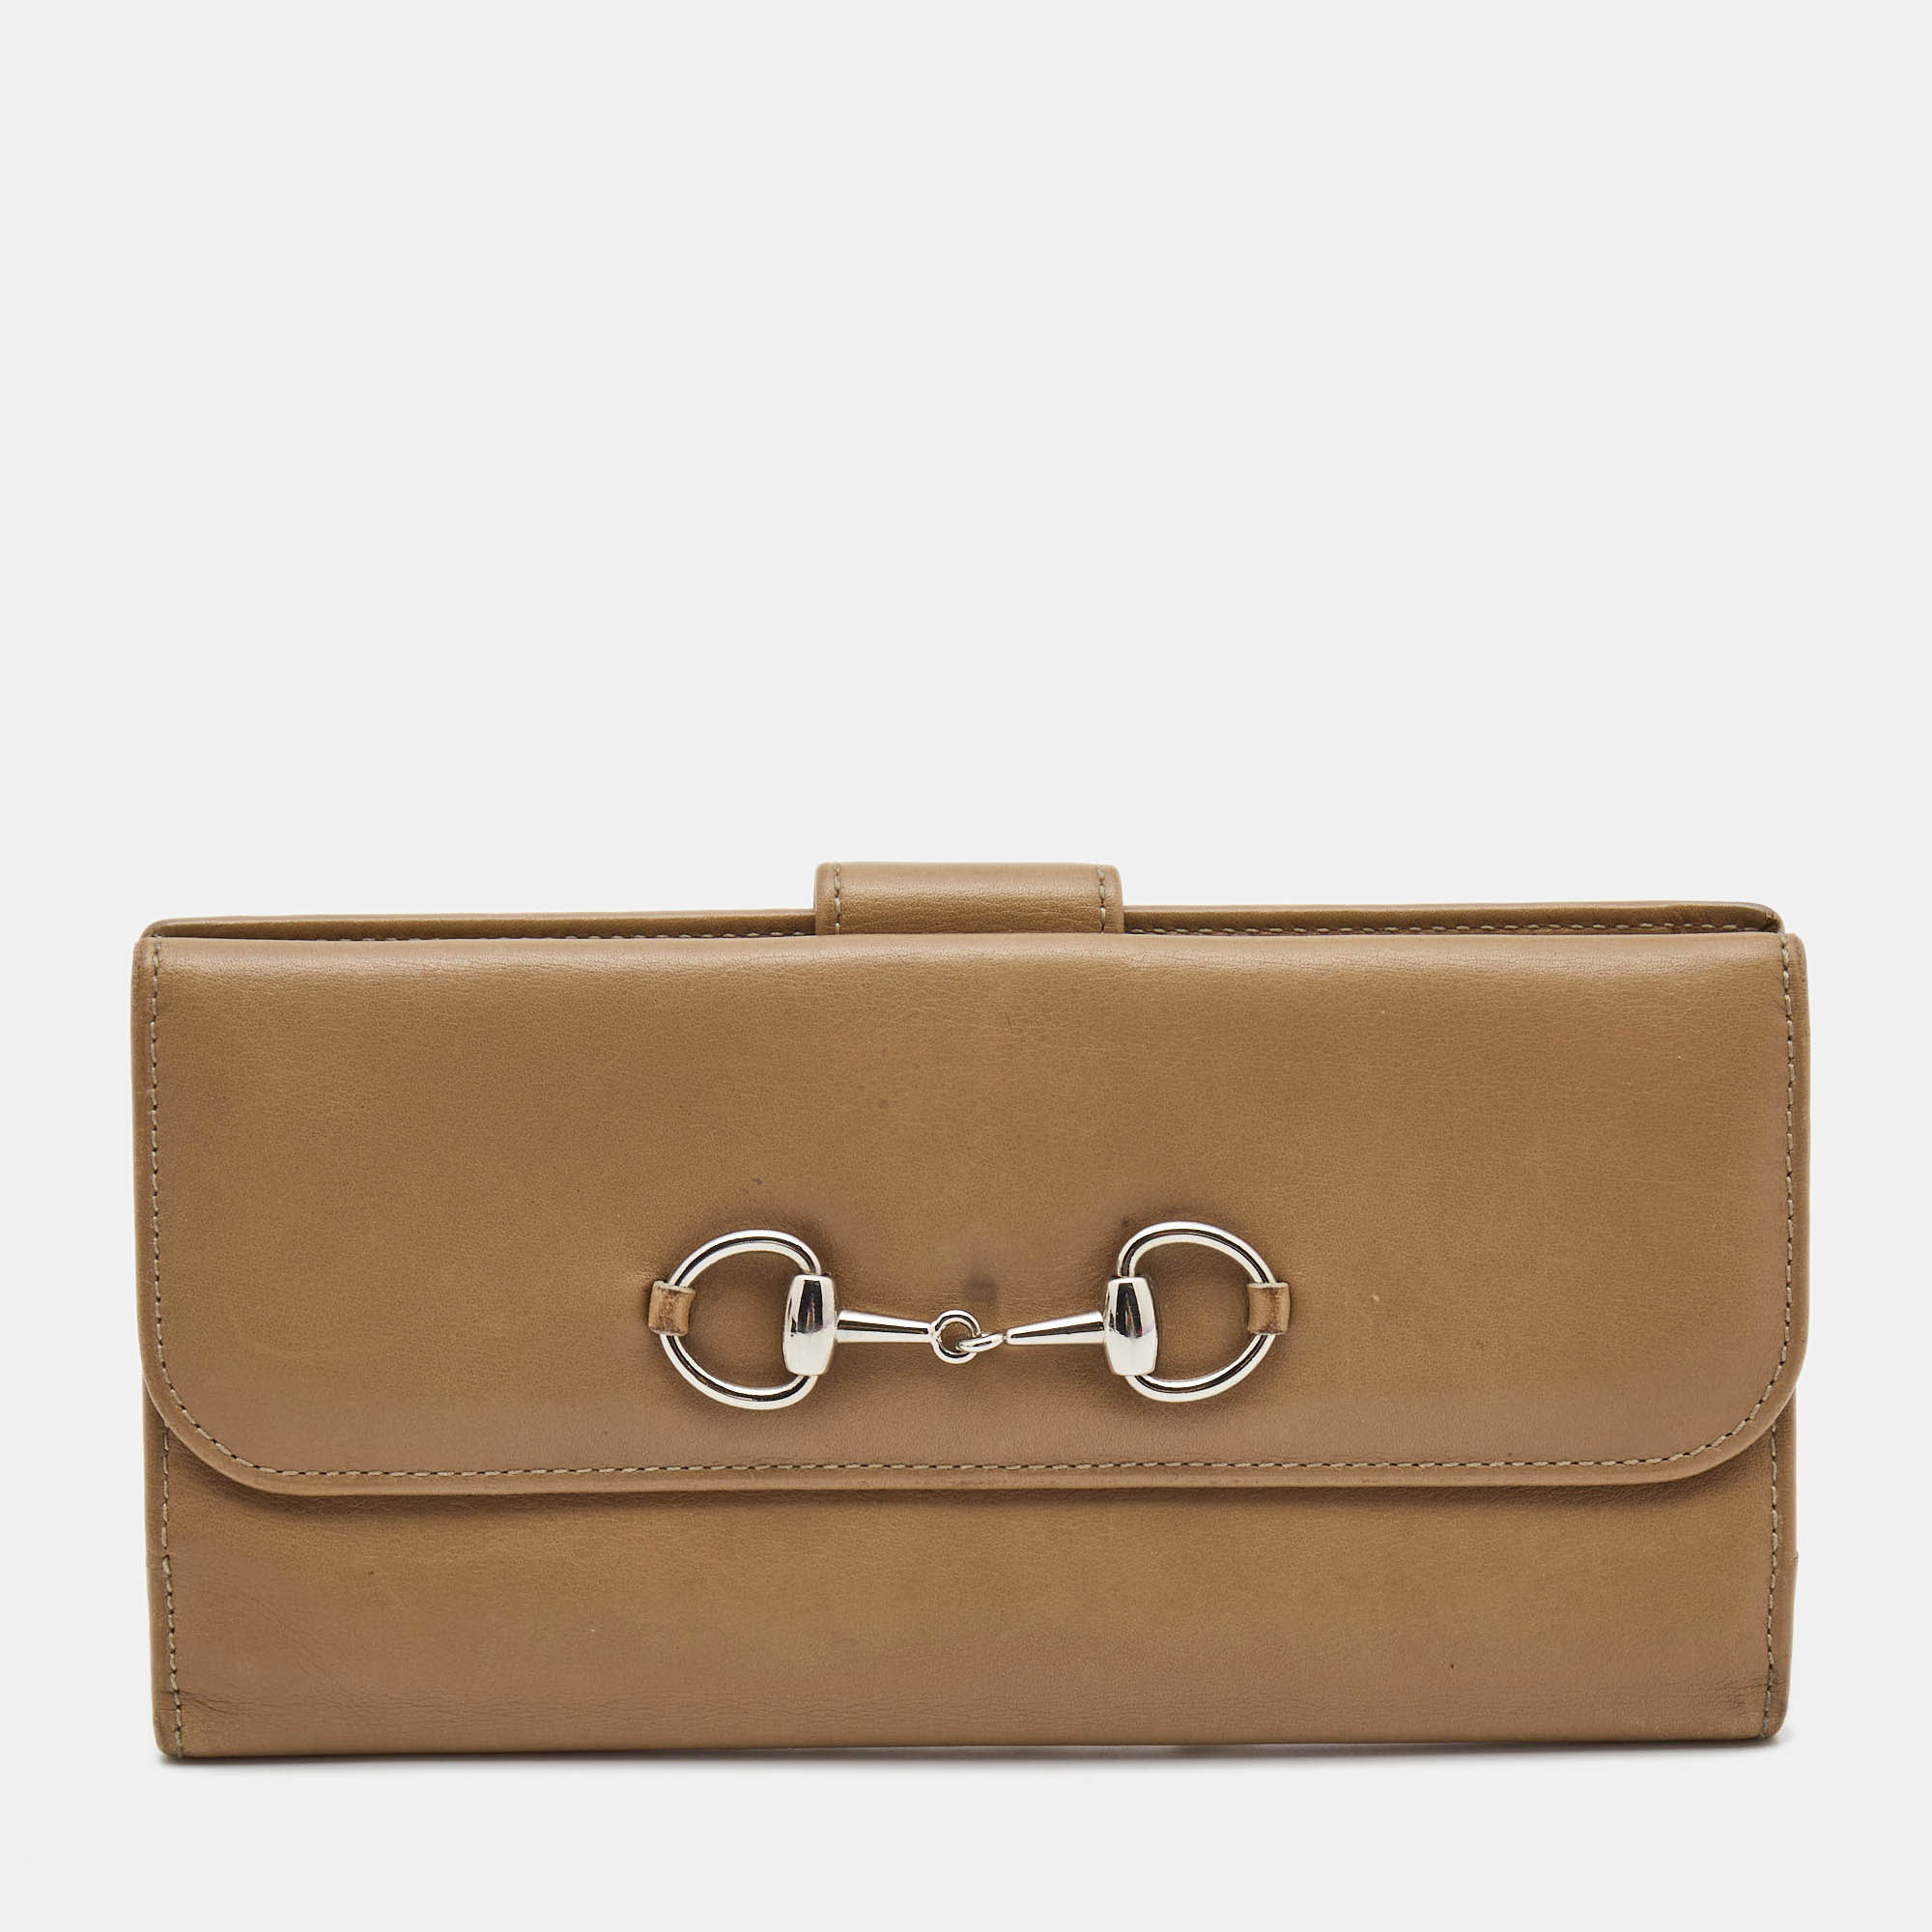 Gucci Beige Leather Horsebit French Wallet